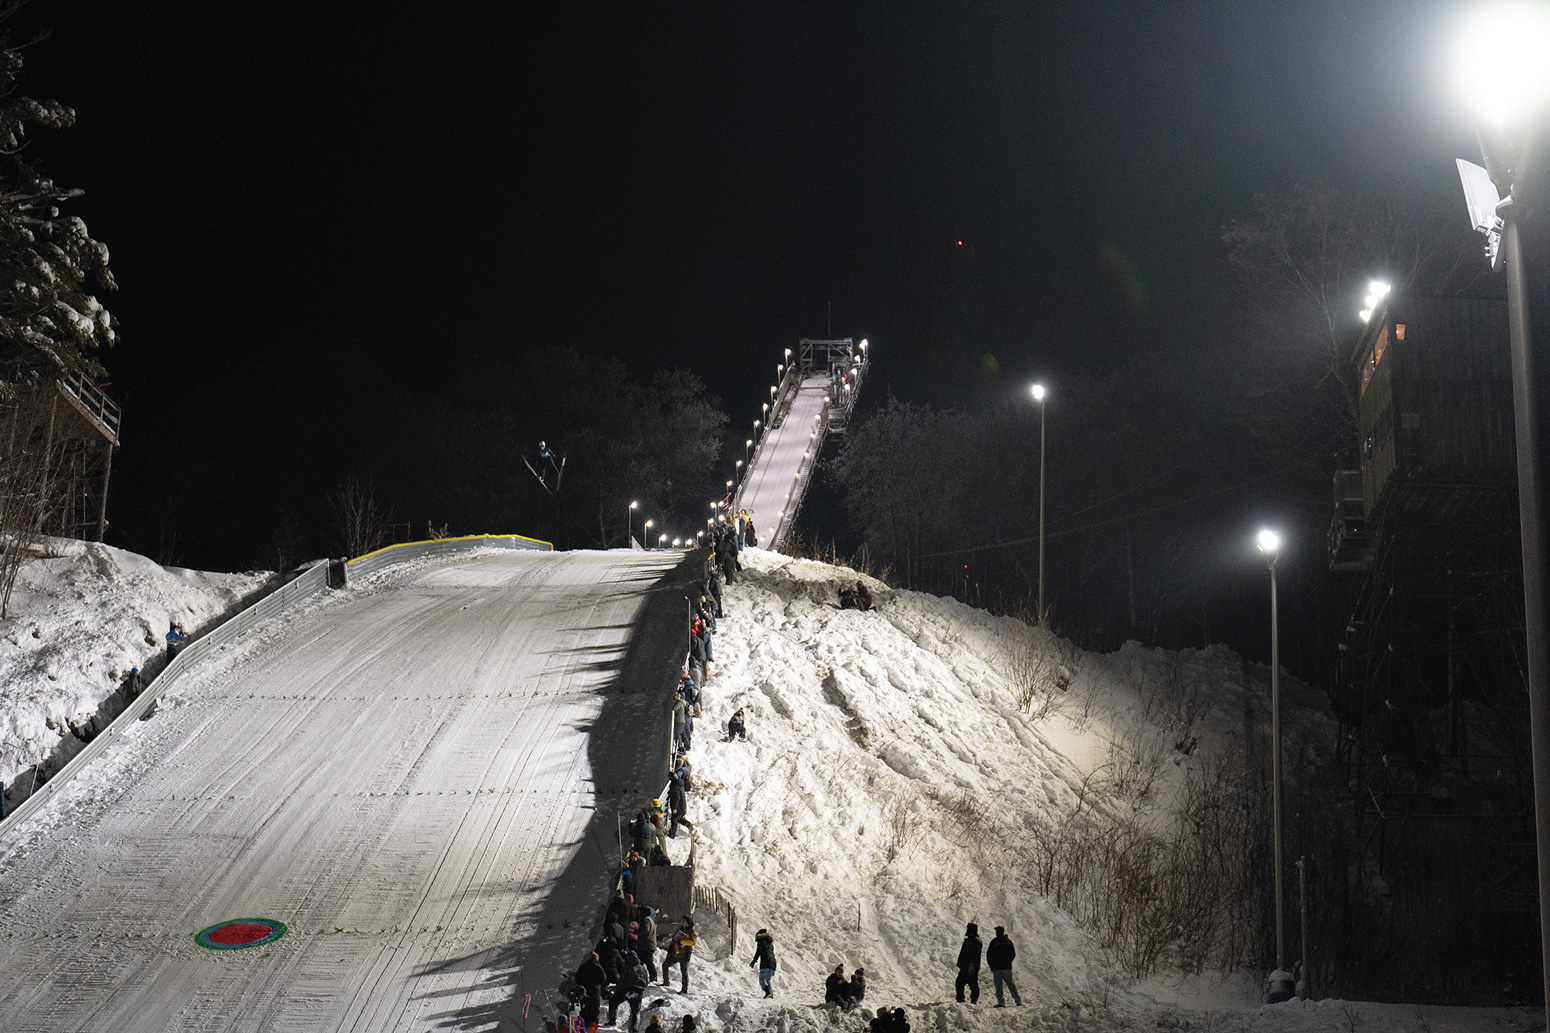 “The target event at the 136th annual ski jump on Suicide Hill put on by Ishpeming Ski Club. Ski jumping has been a tradition in the Upper Peninsula since the late 1800s. Originally brought here by Norwegian immigrants, the tradition stands today. In the target event skiers try to land as close as possible to the target painted in the landing zone.”  Photo: Kyle Bolen